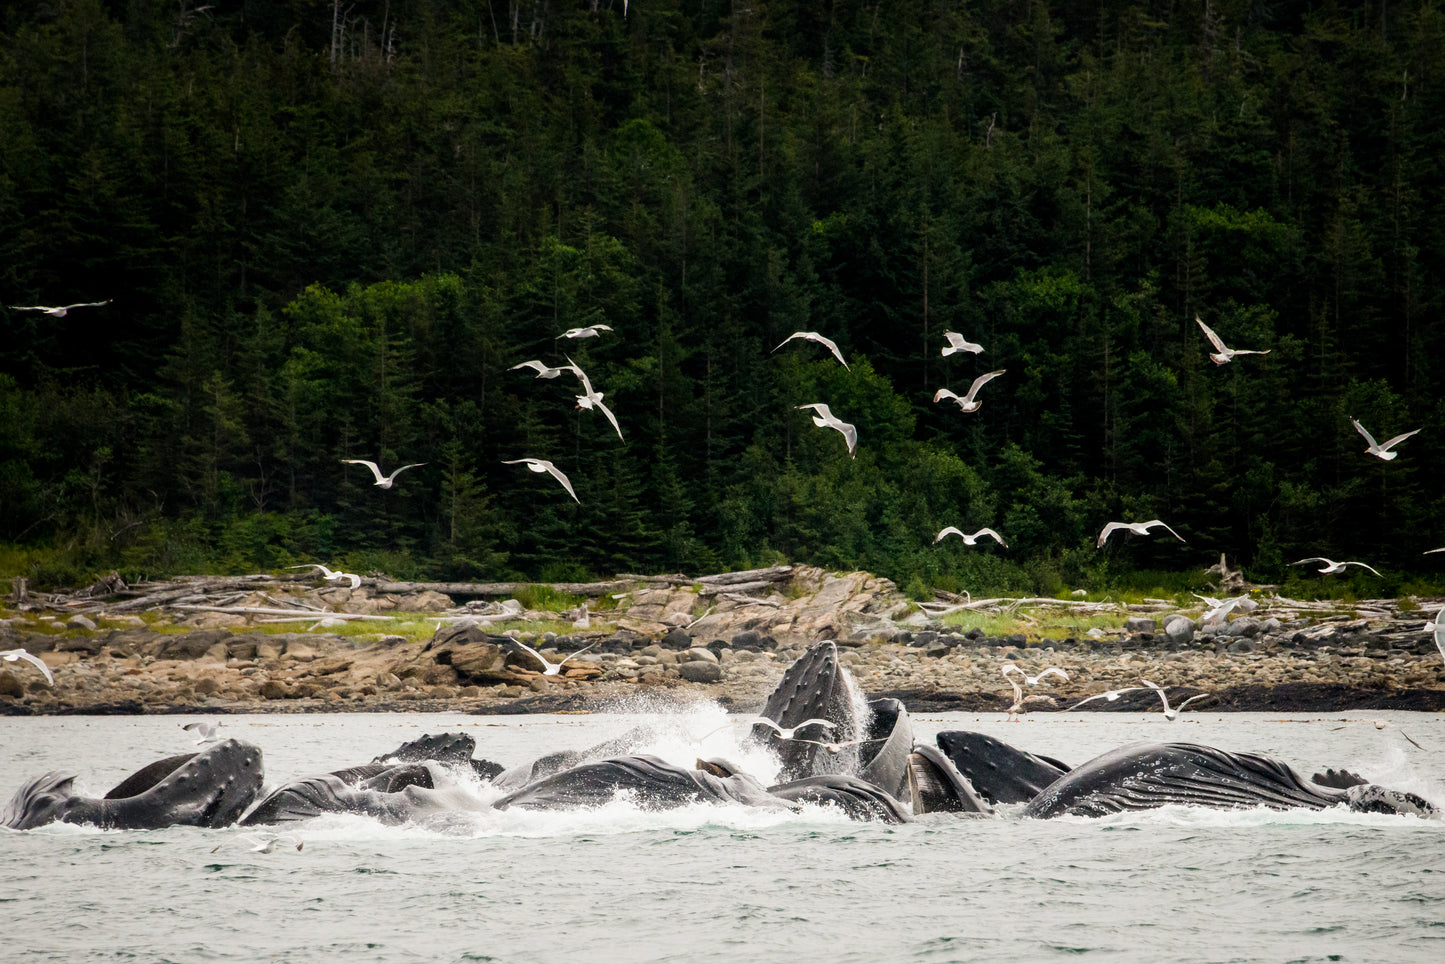 Thirteen massive, majestic, humpback whales in Alaska, usually solitary creatures, seen hunting together in the krill-rich waters. The scene almost dances, as if so much activity and excitement at the feast could not be contained.